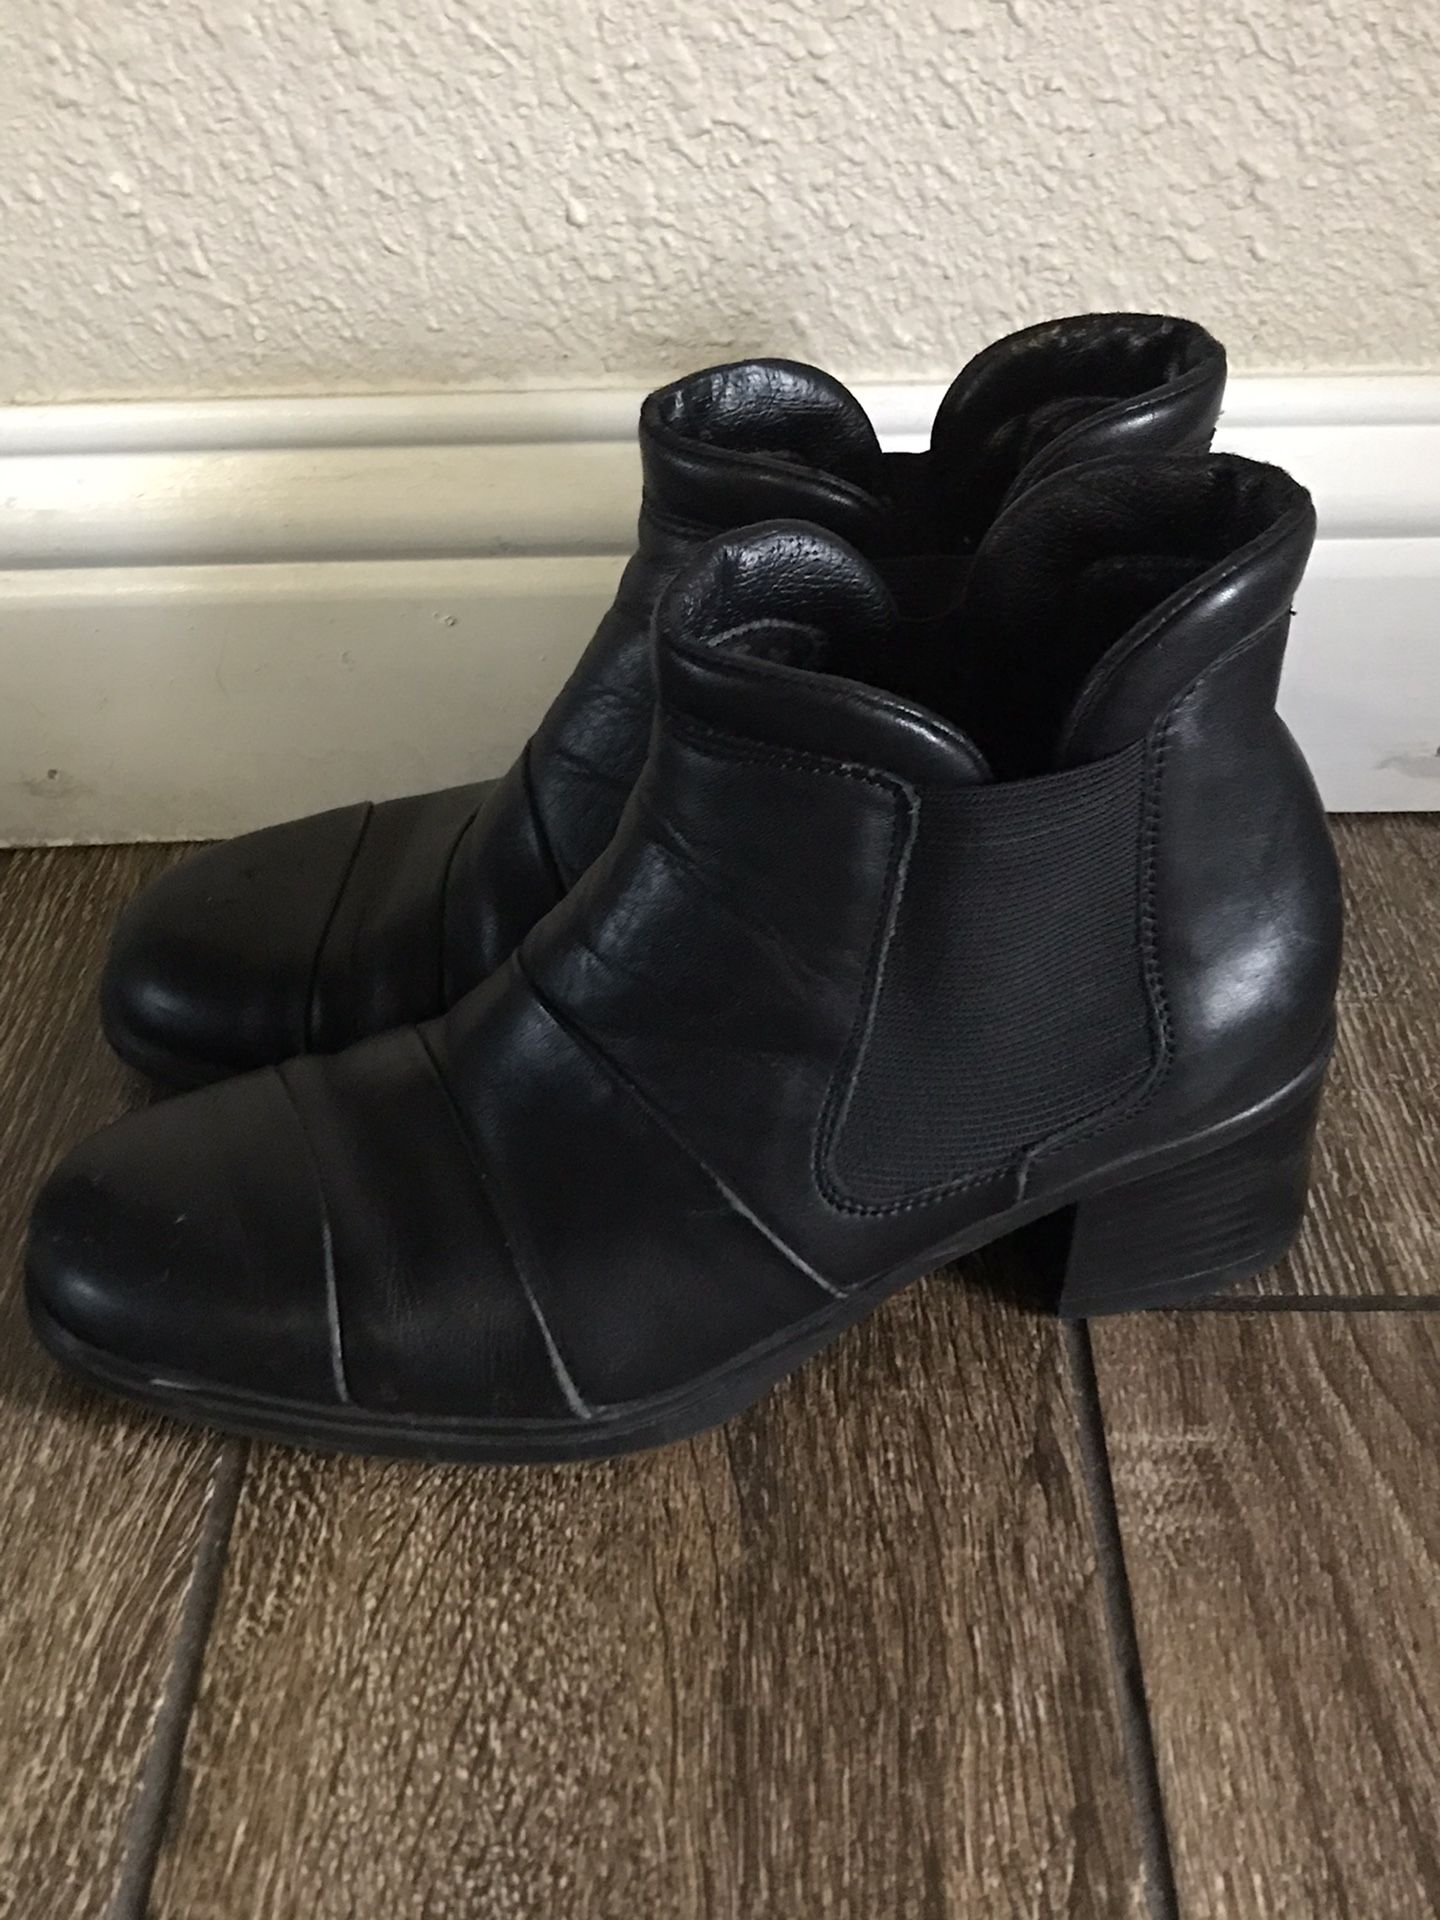 Women’s Rieker ankle boots size 7 NEW